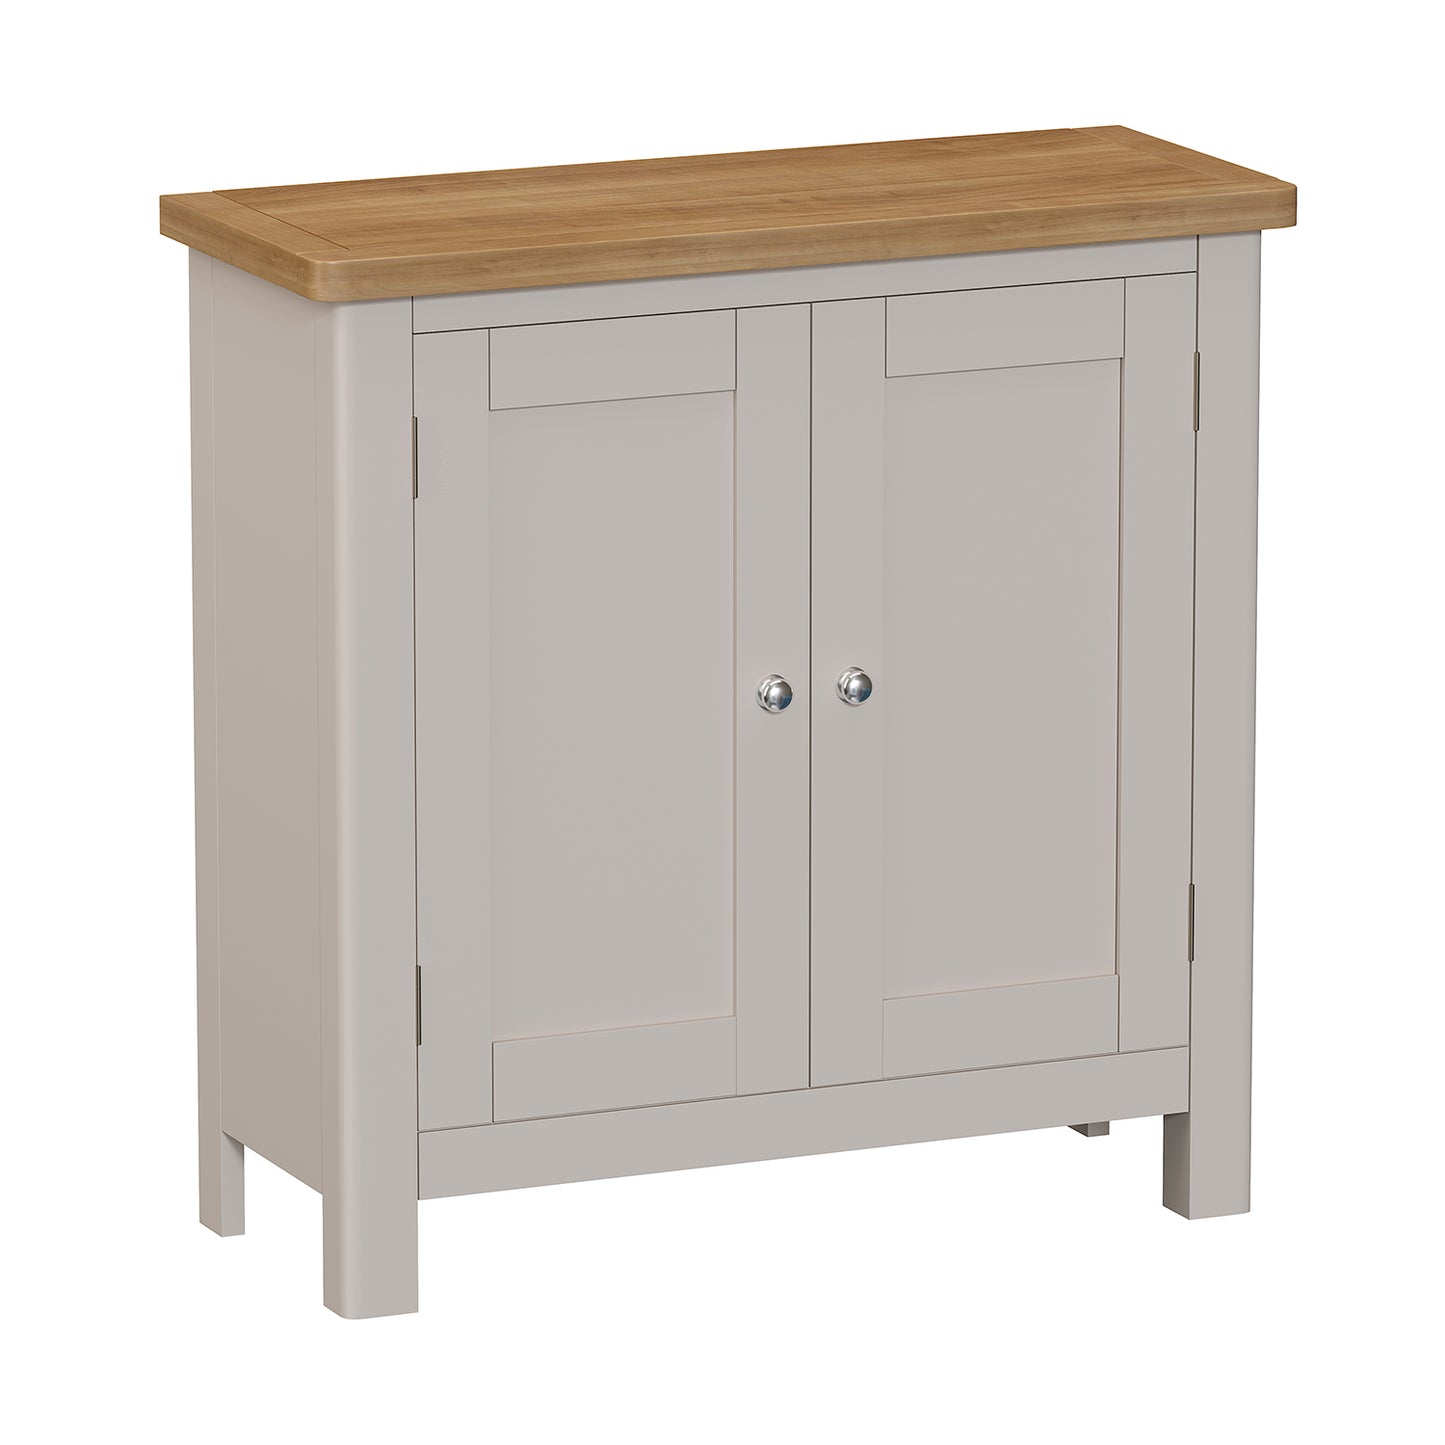 Pershore Painted Sideboard - Small